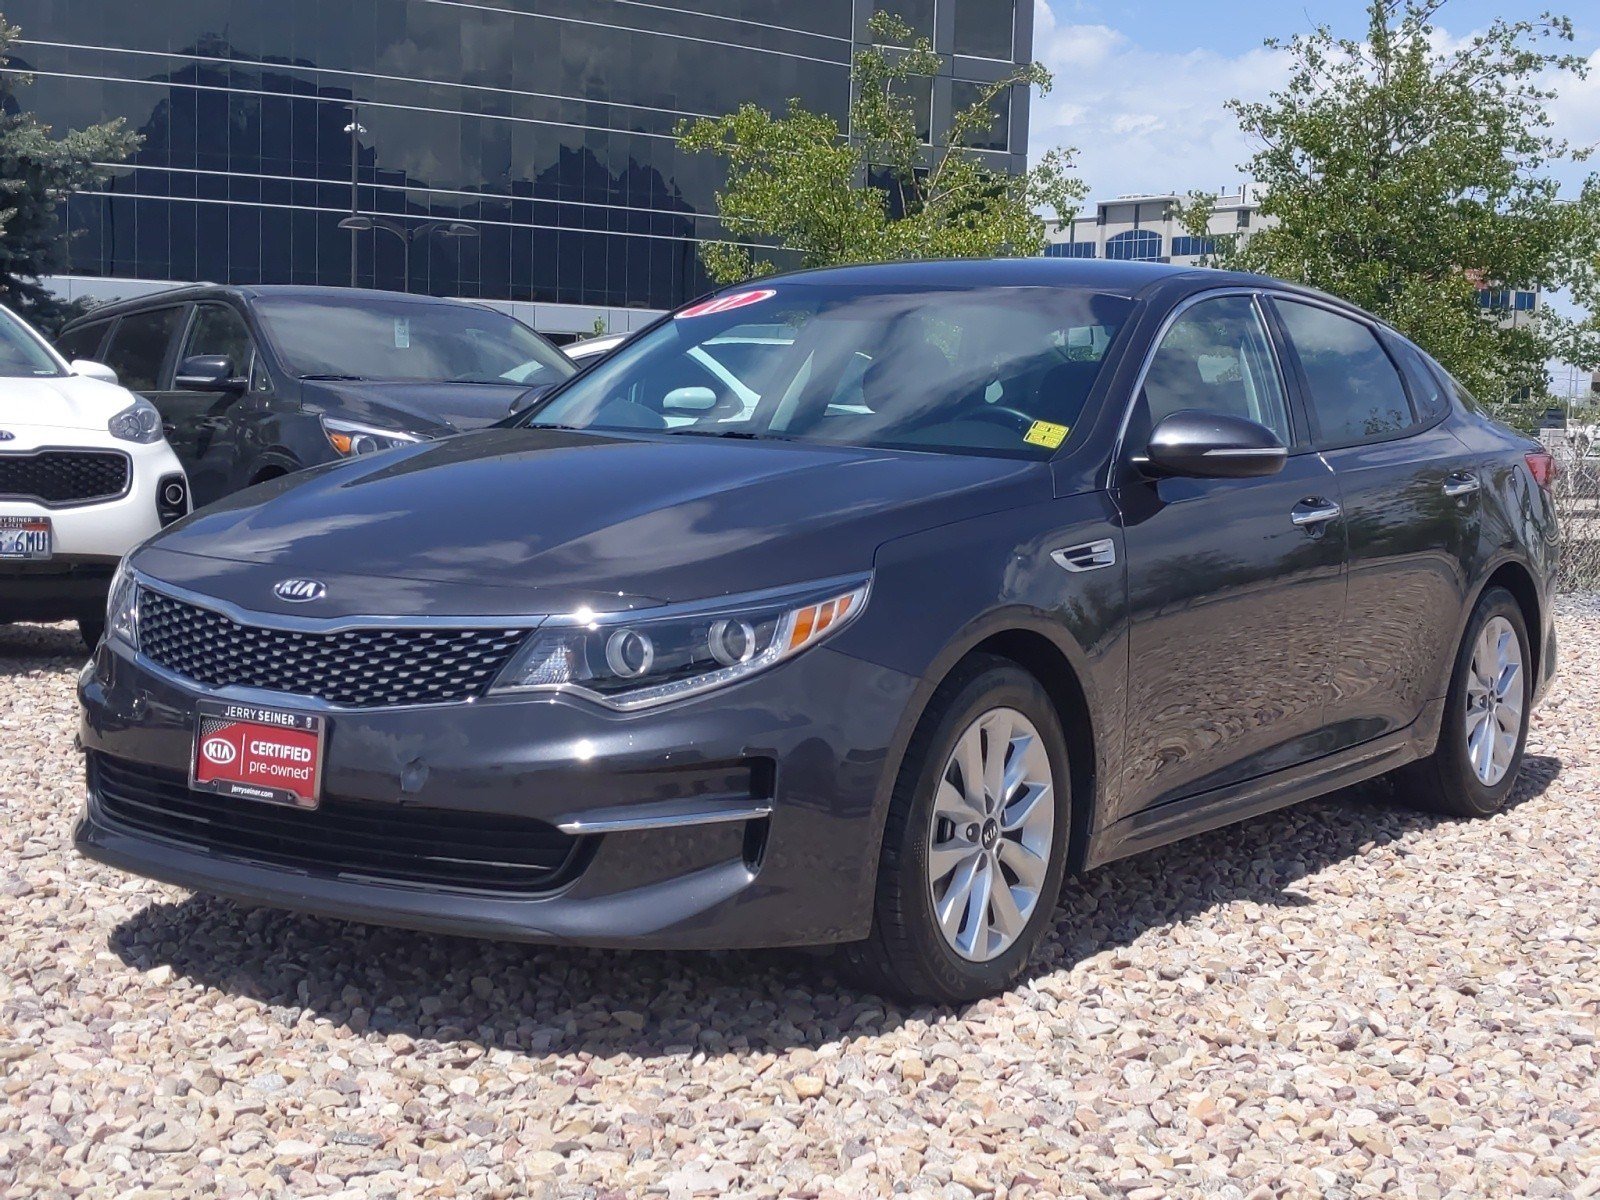 Certified Pre-Owned 2017 Kia Optima EX FWD 4dr Car